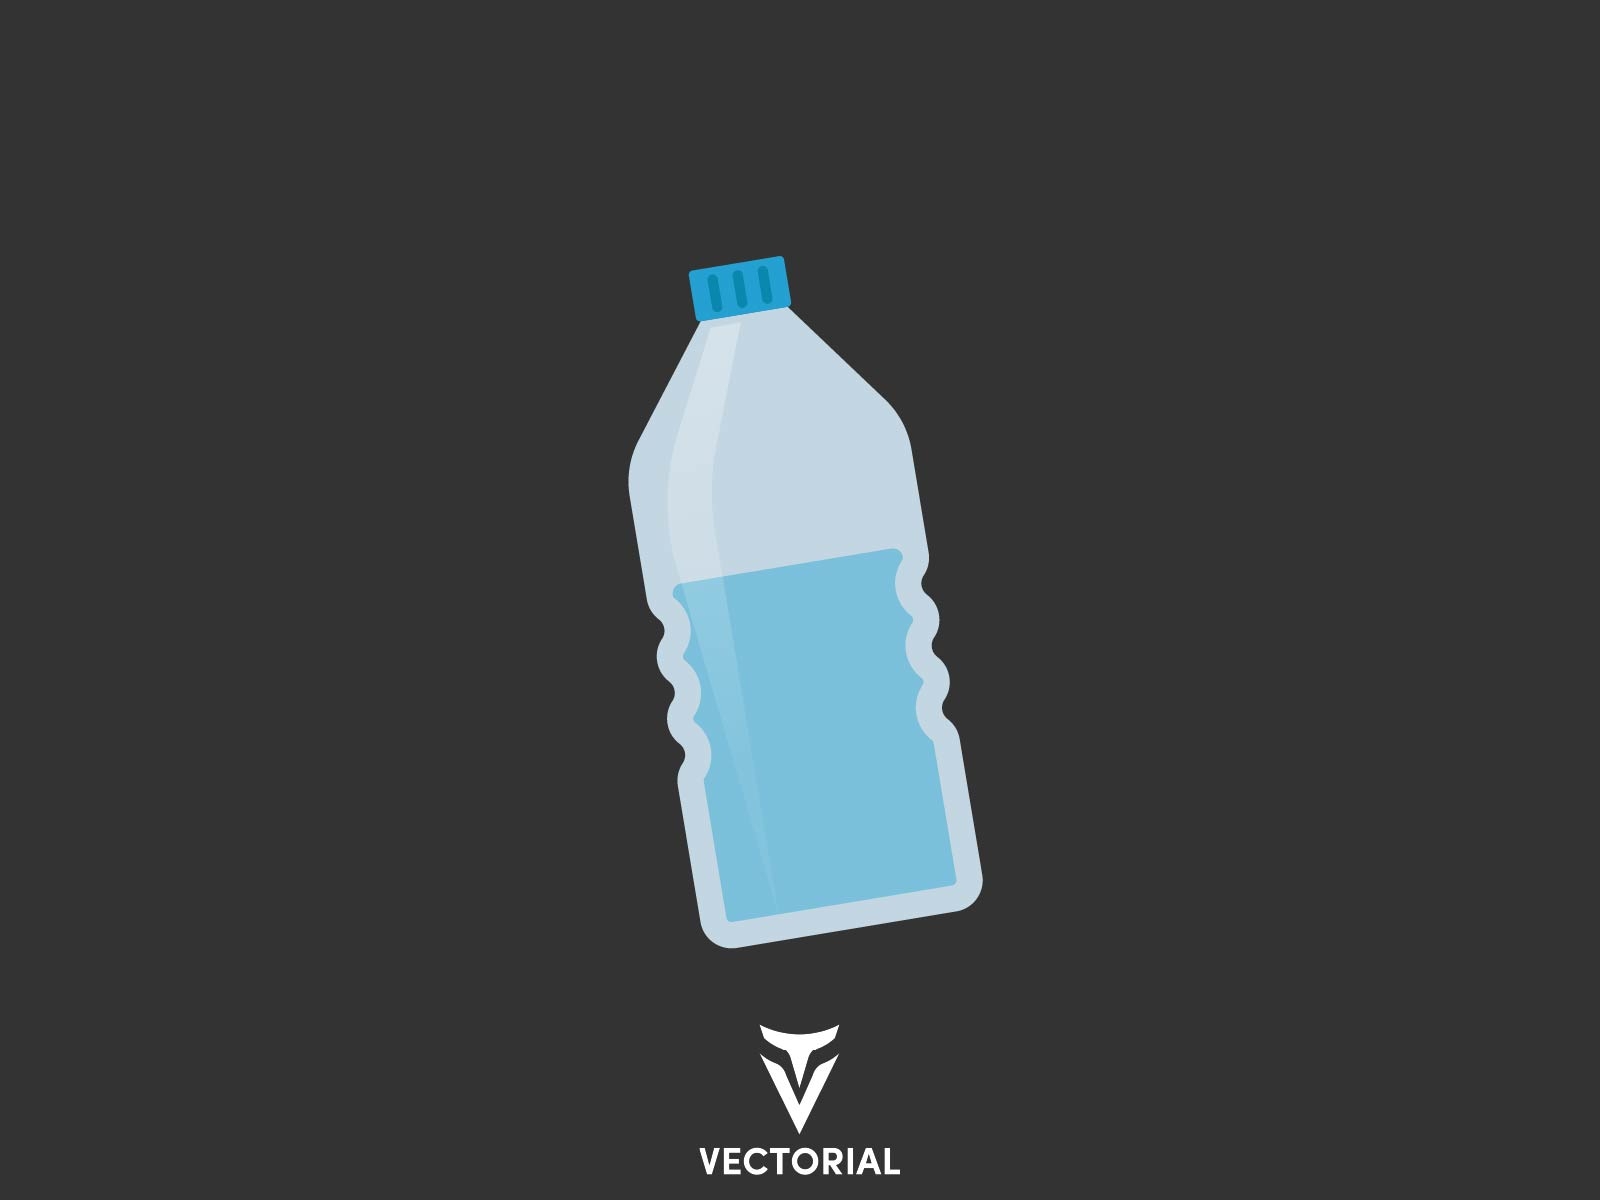 Water bottle by Vectorial on Dribbble